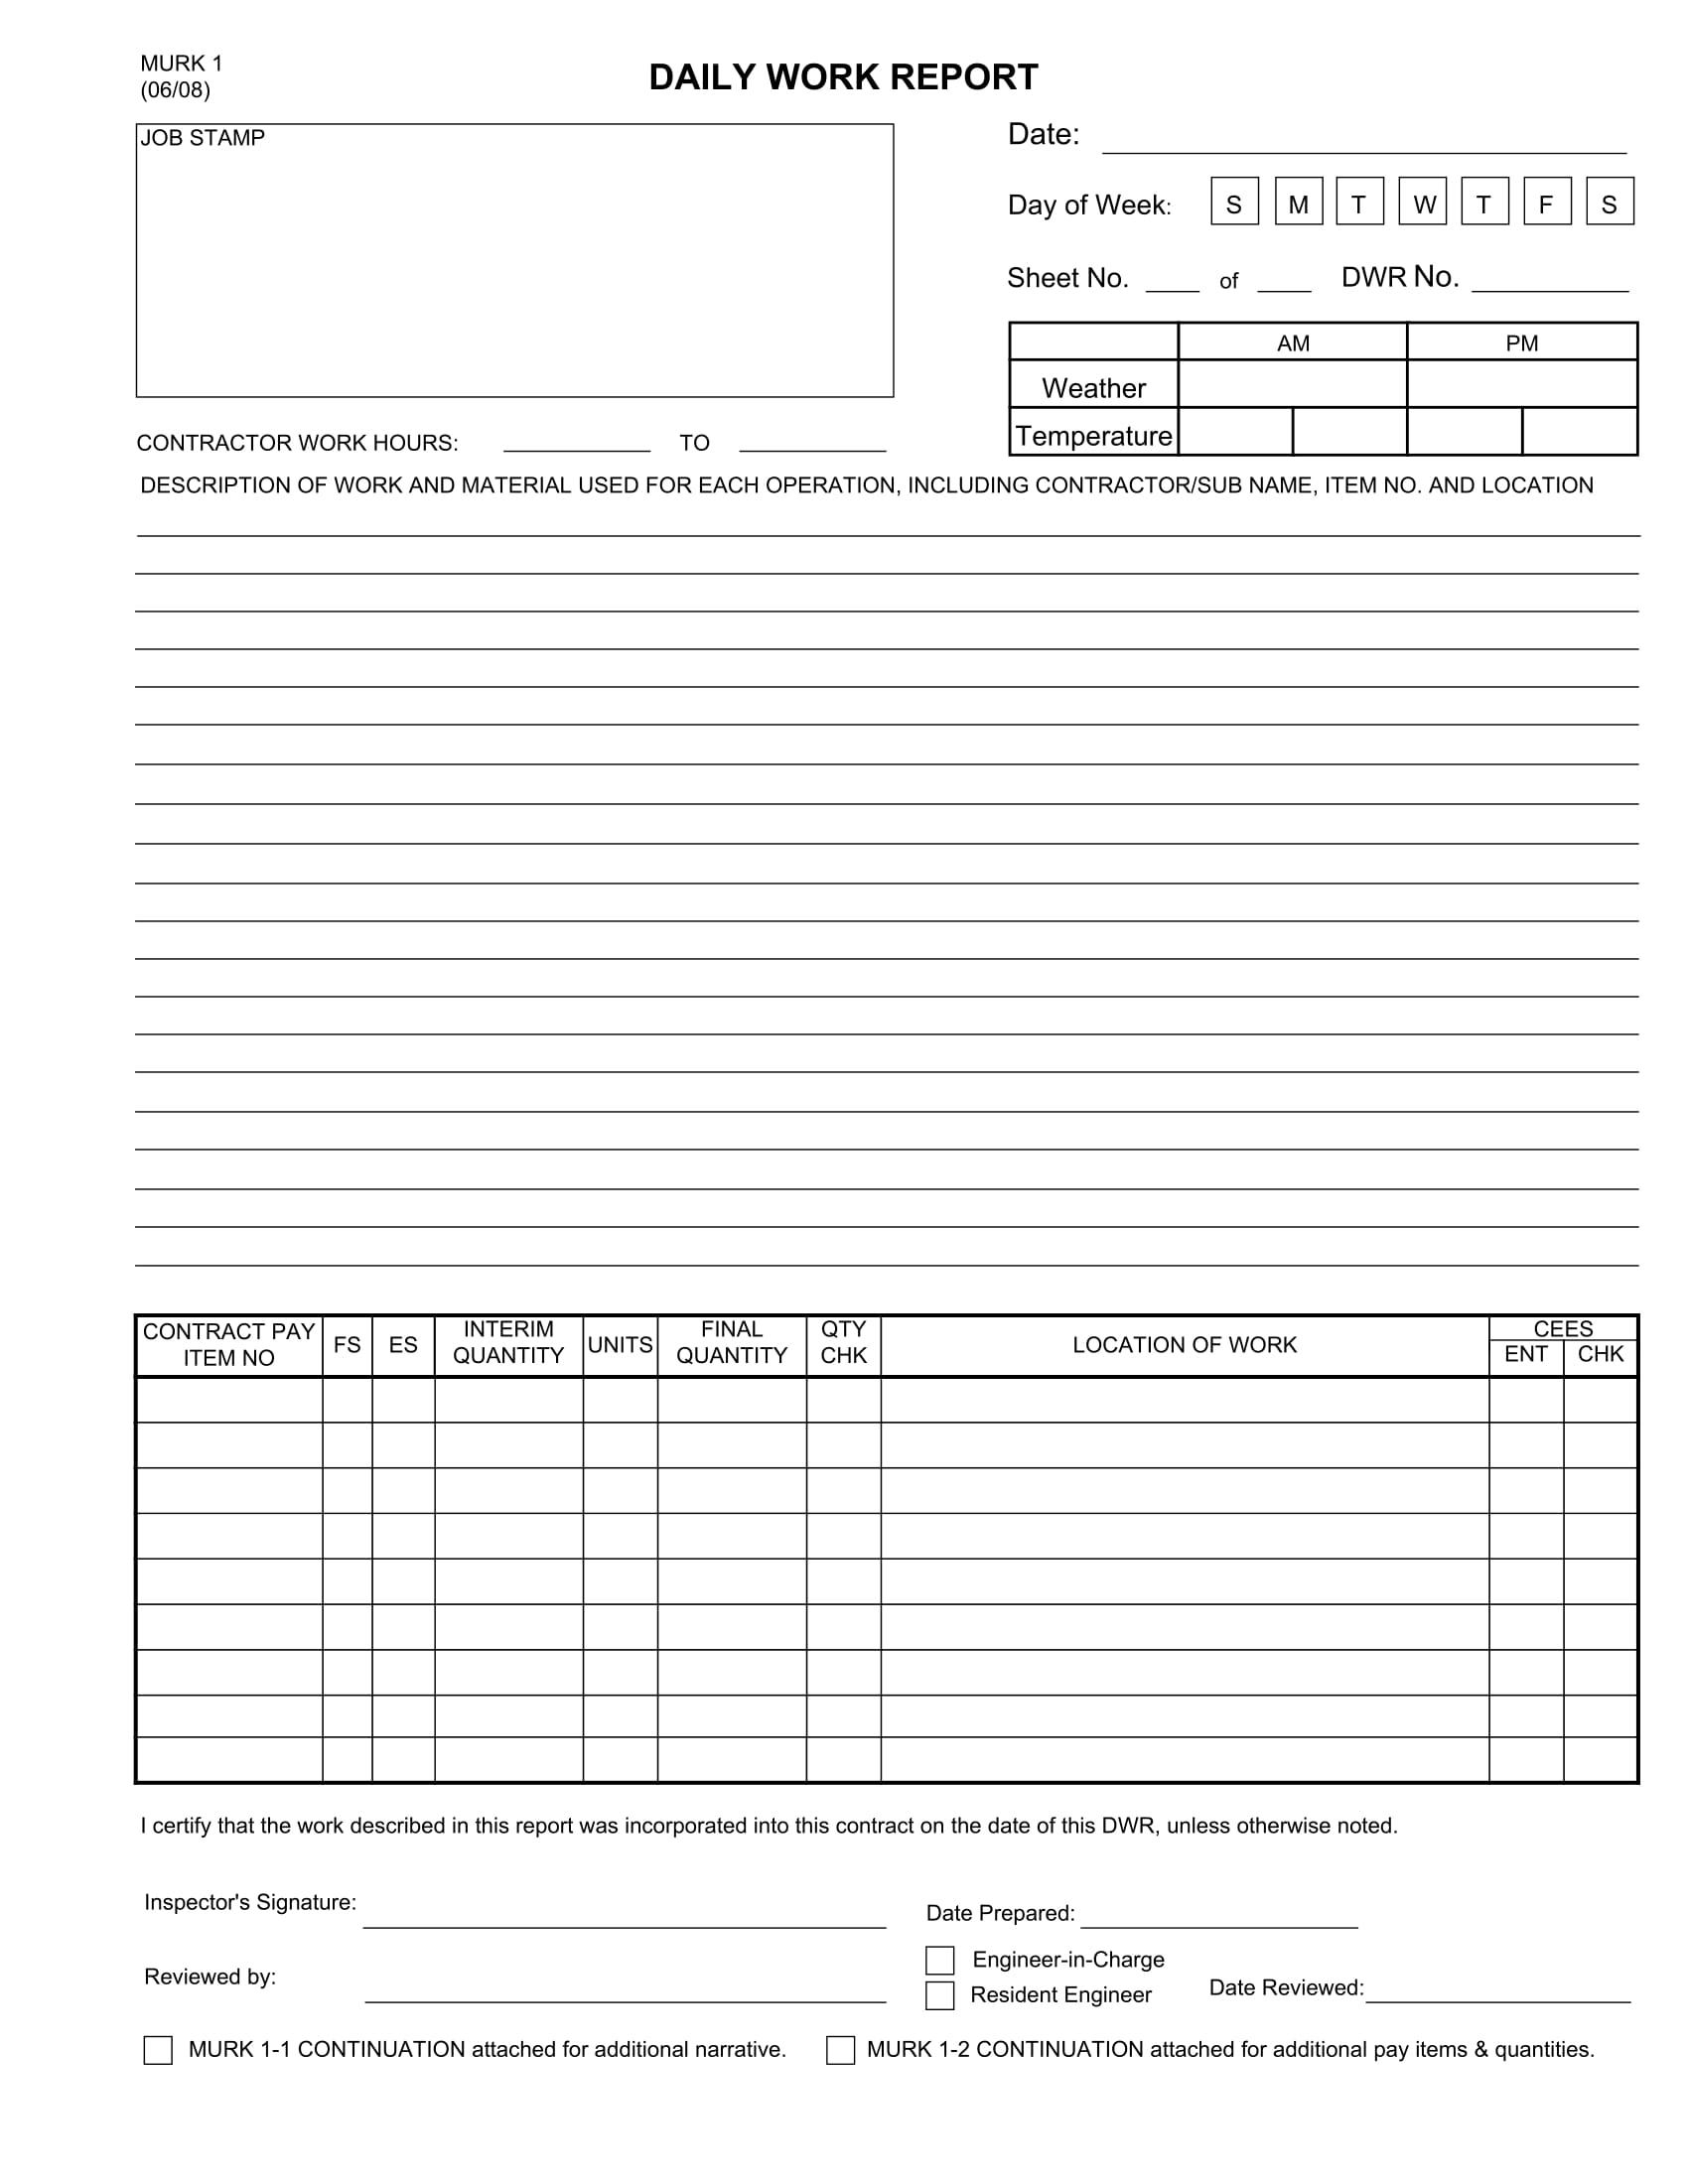 fillable daily work report form 1